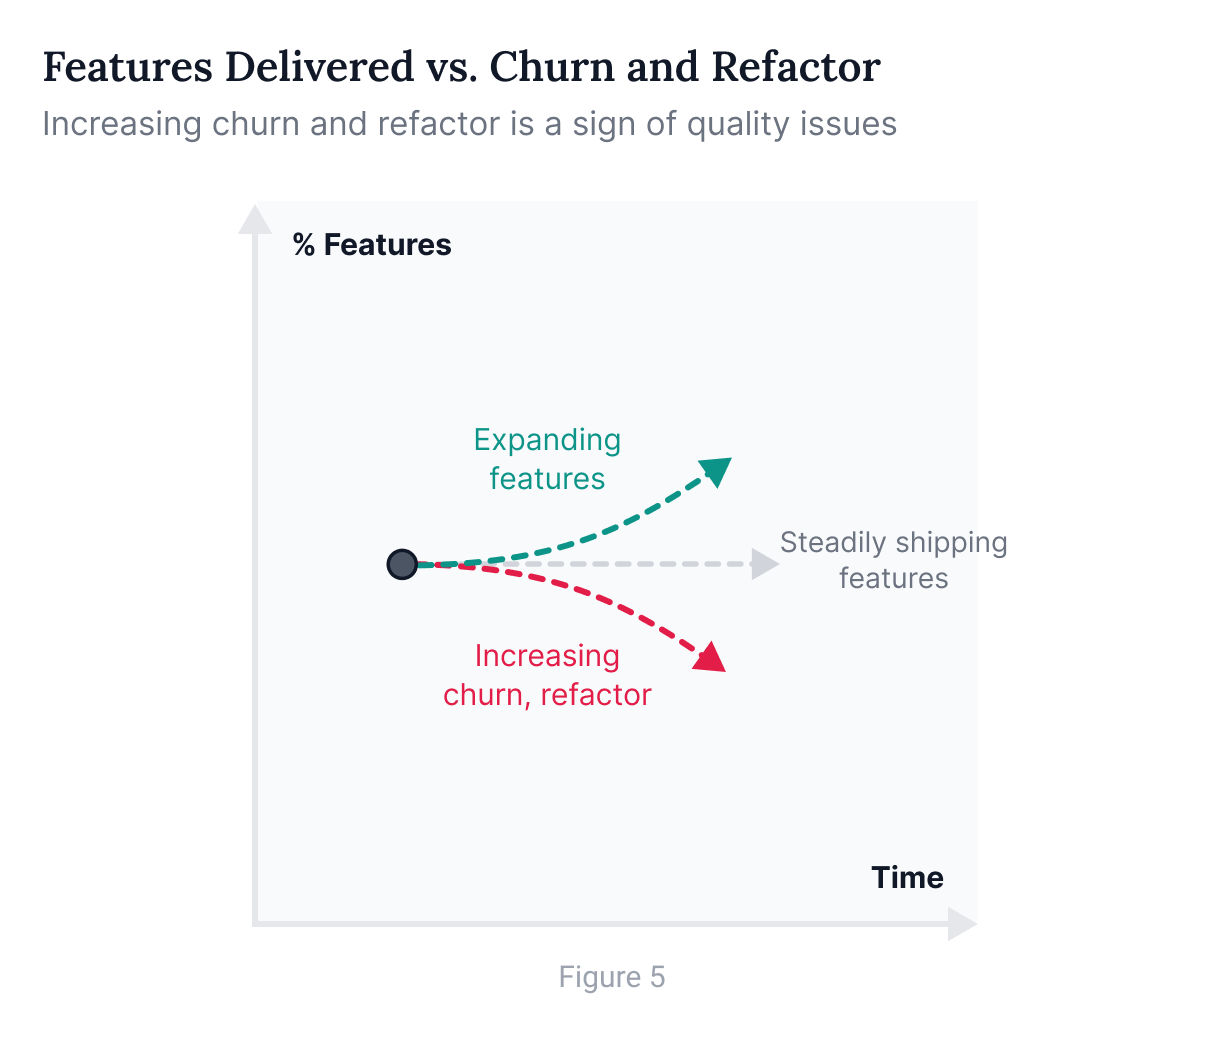 Features delivered vs. churn and refactor